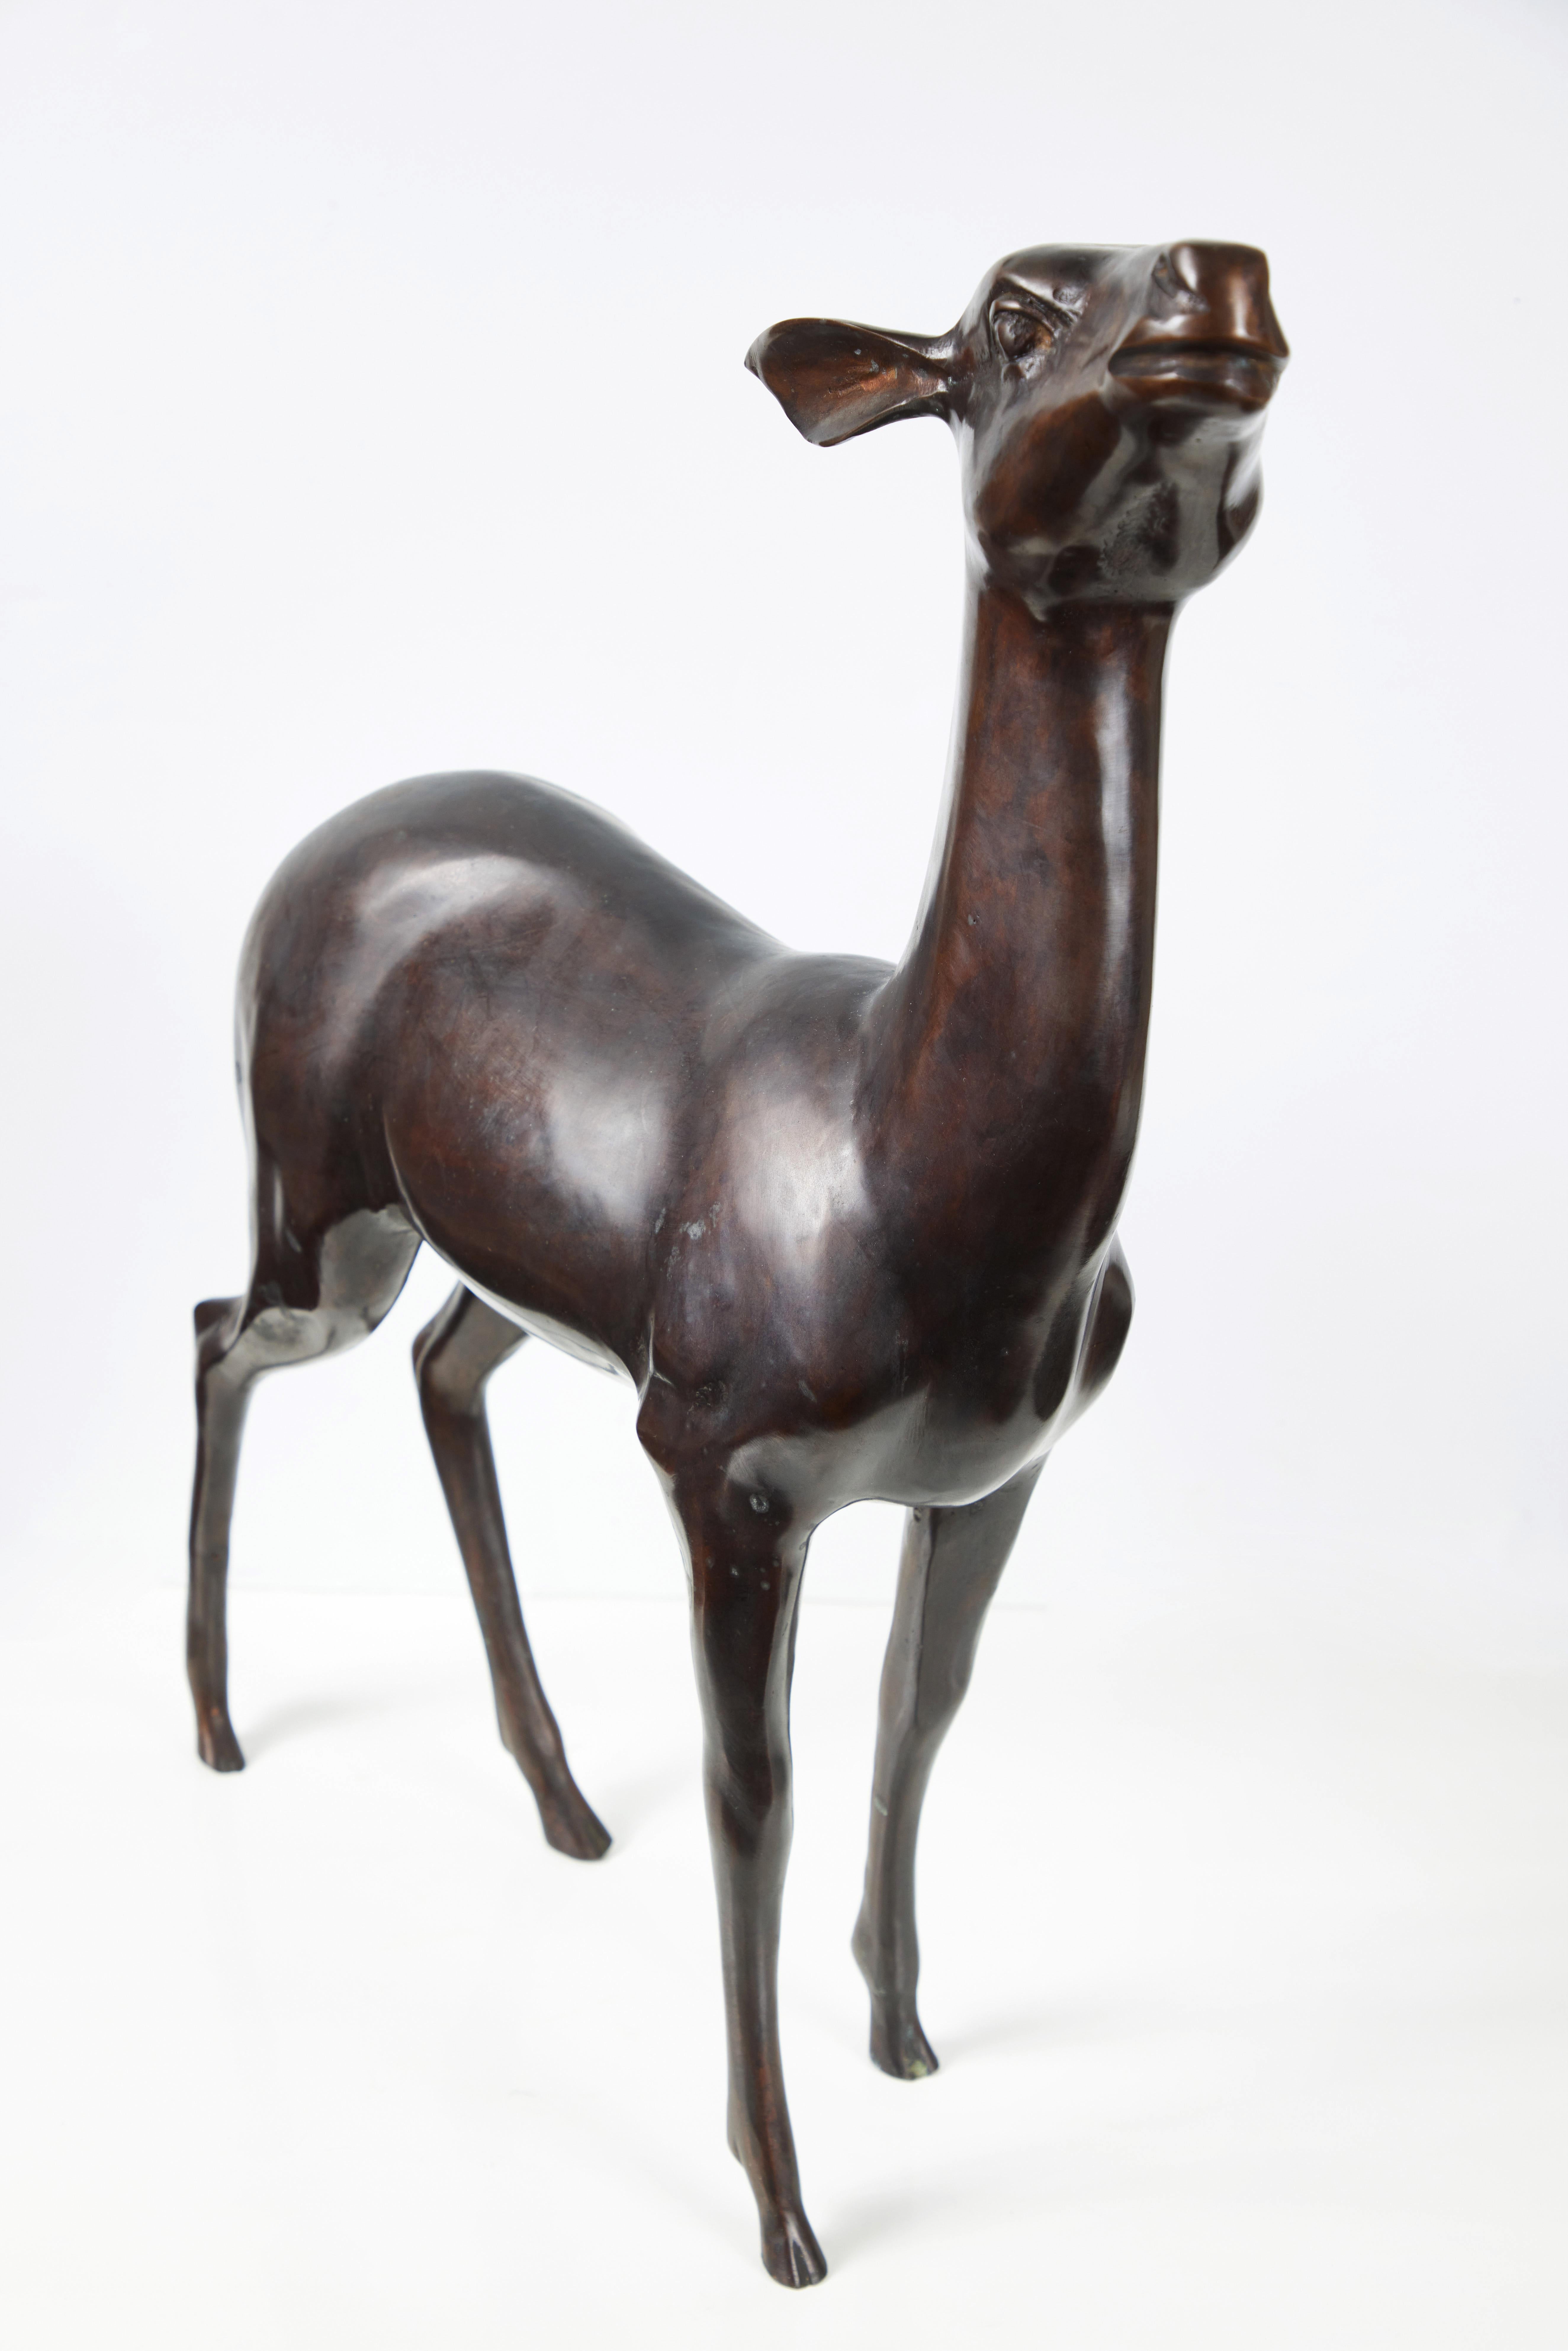 Charming, decorative bronze deer sculpture. Late 1970's, early 1980's.